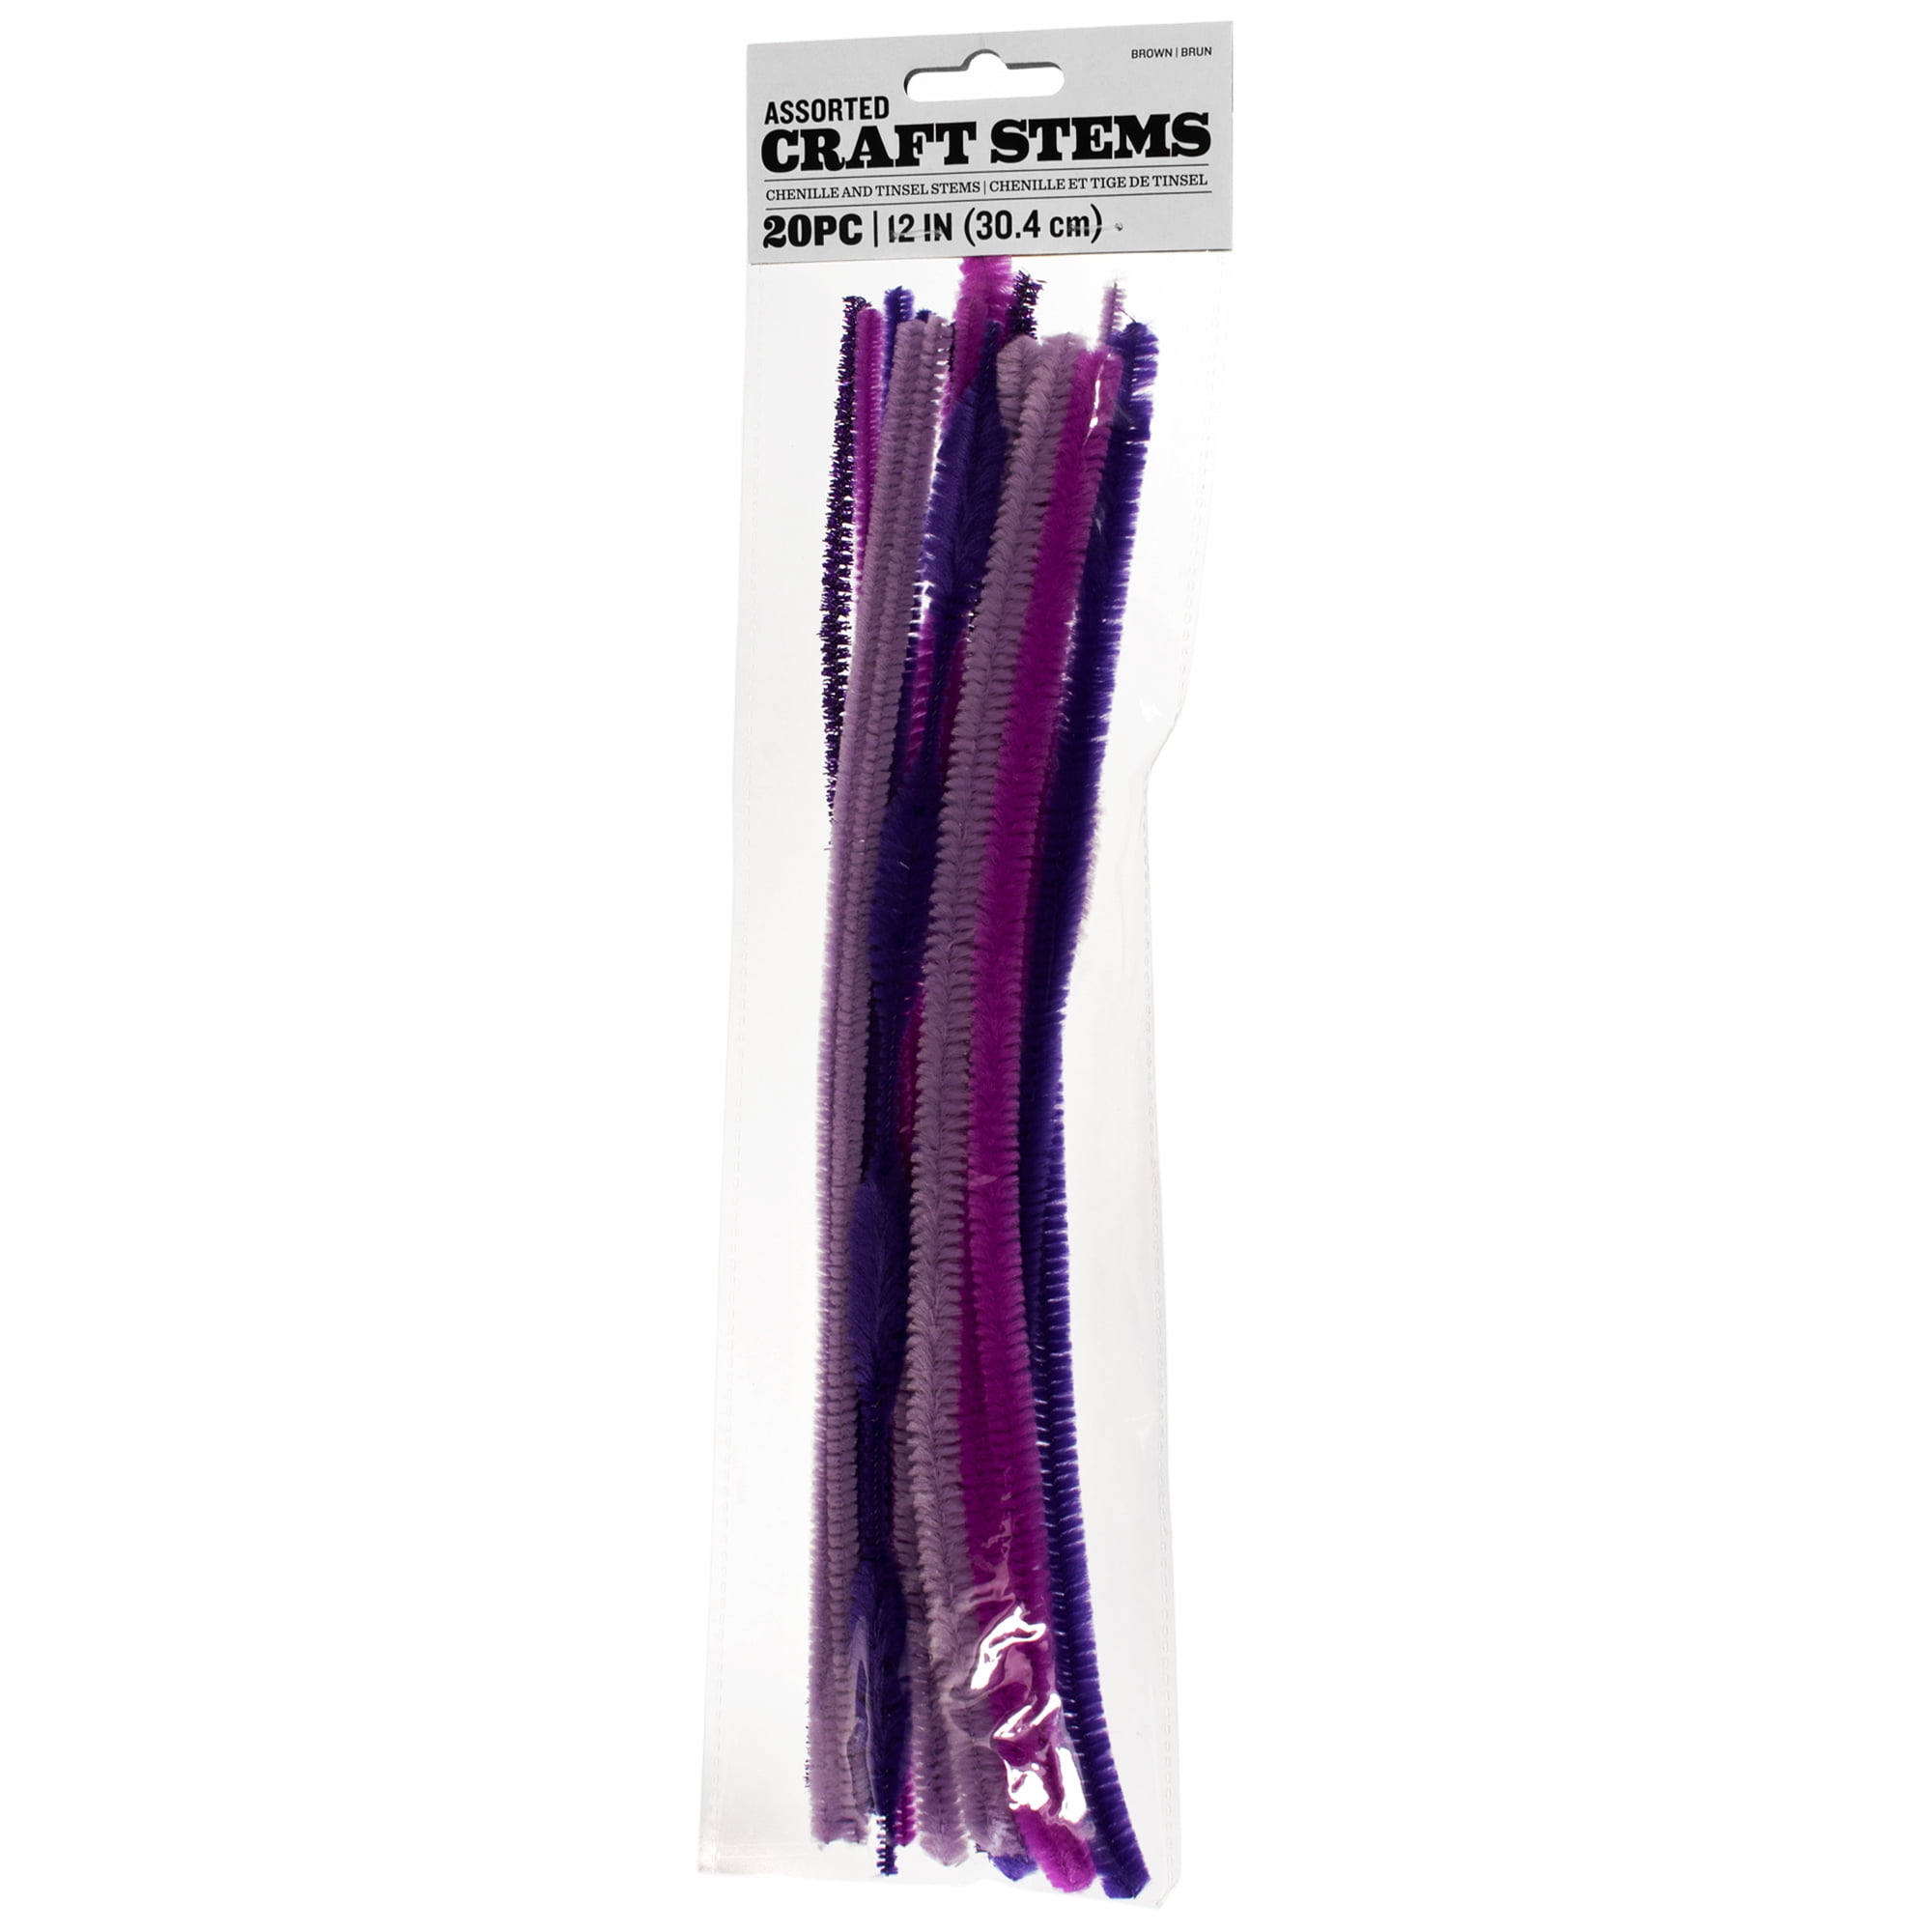 Enjoy Dokha Chenille Stems Craft Supplies for DIY Art Projects